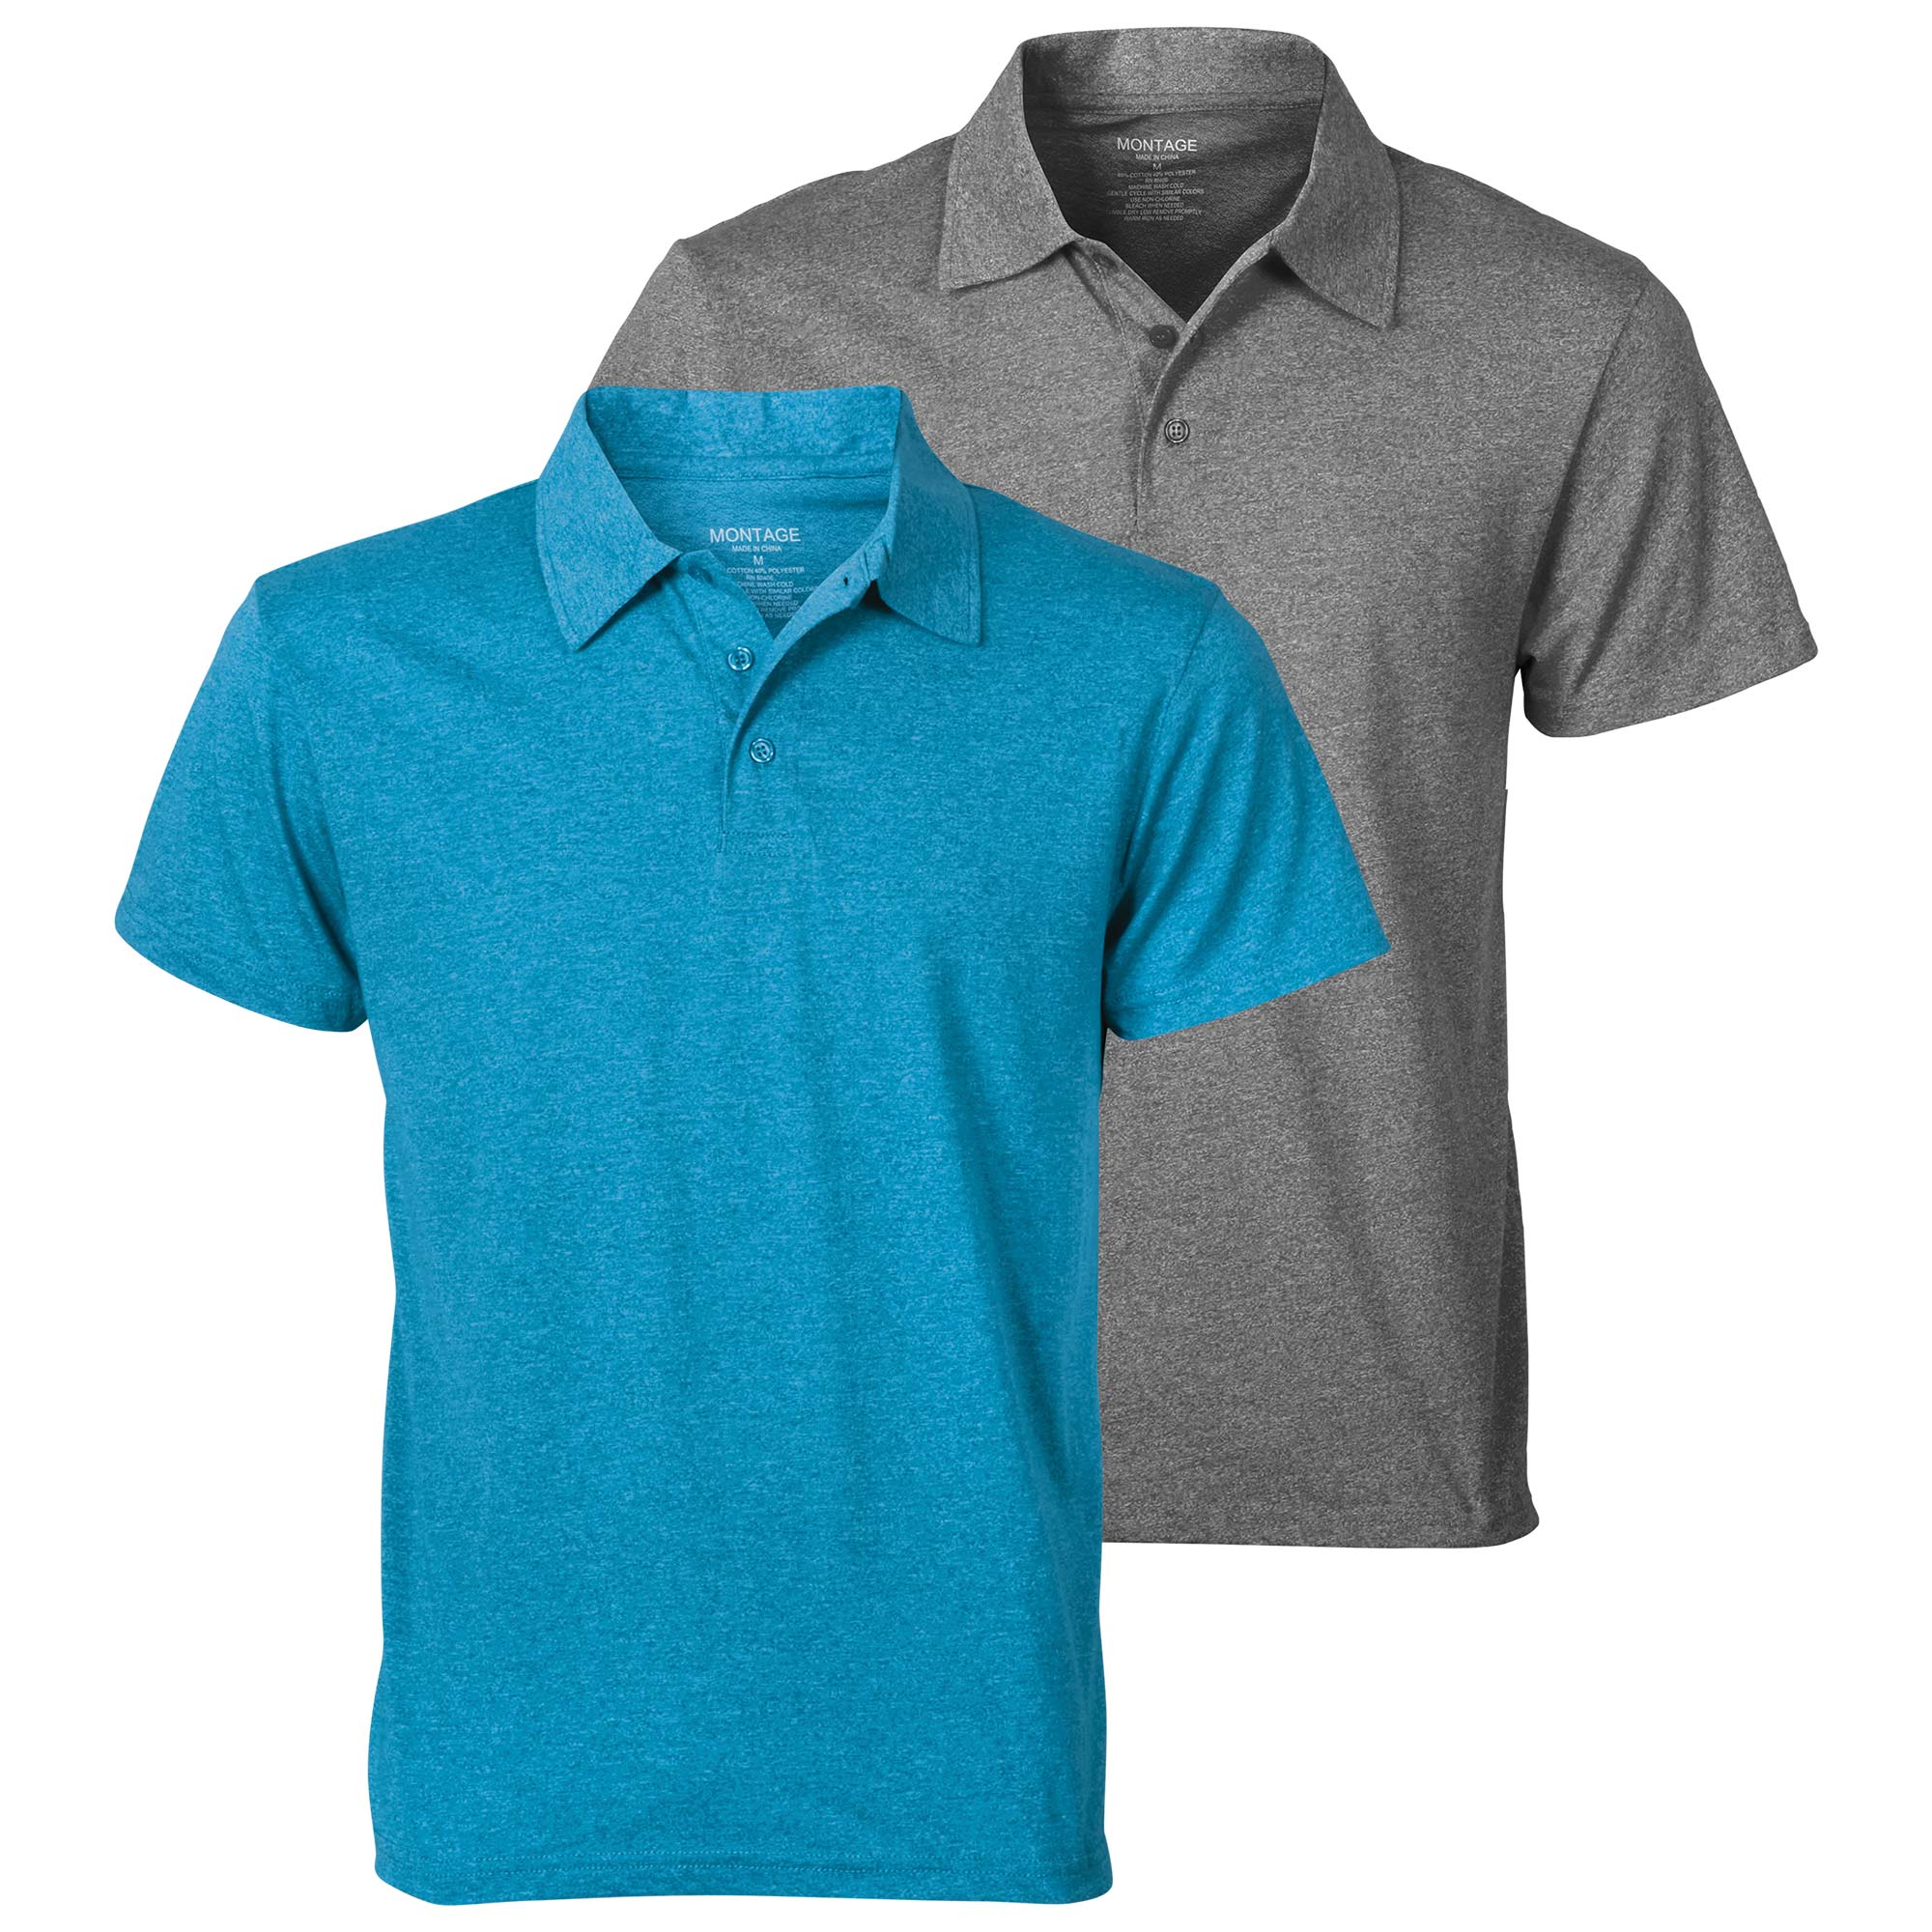 Montage Men's Short-Sleeve Polo - 2 Pack